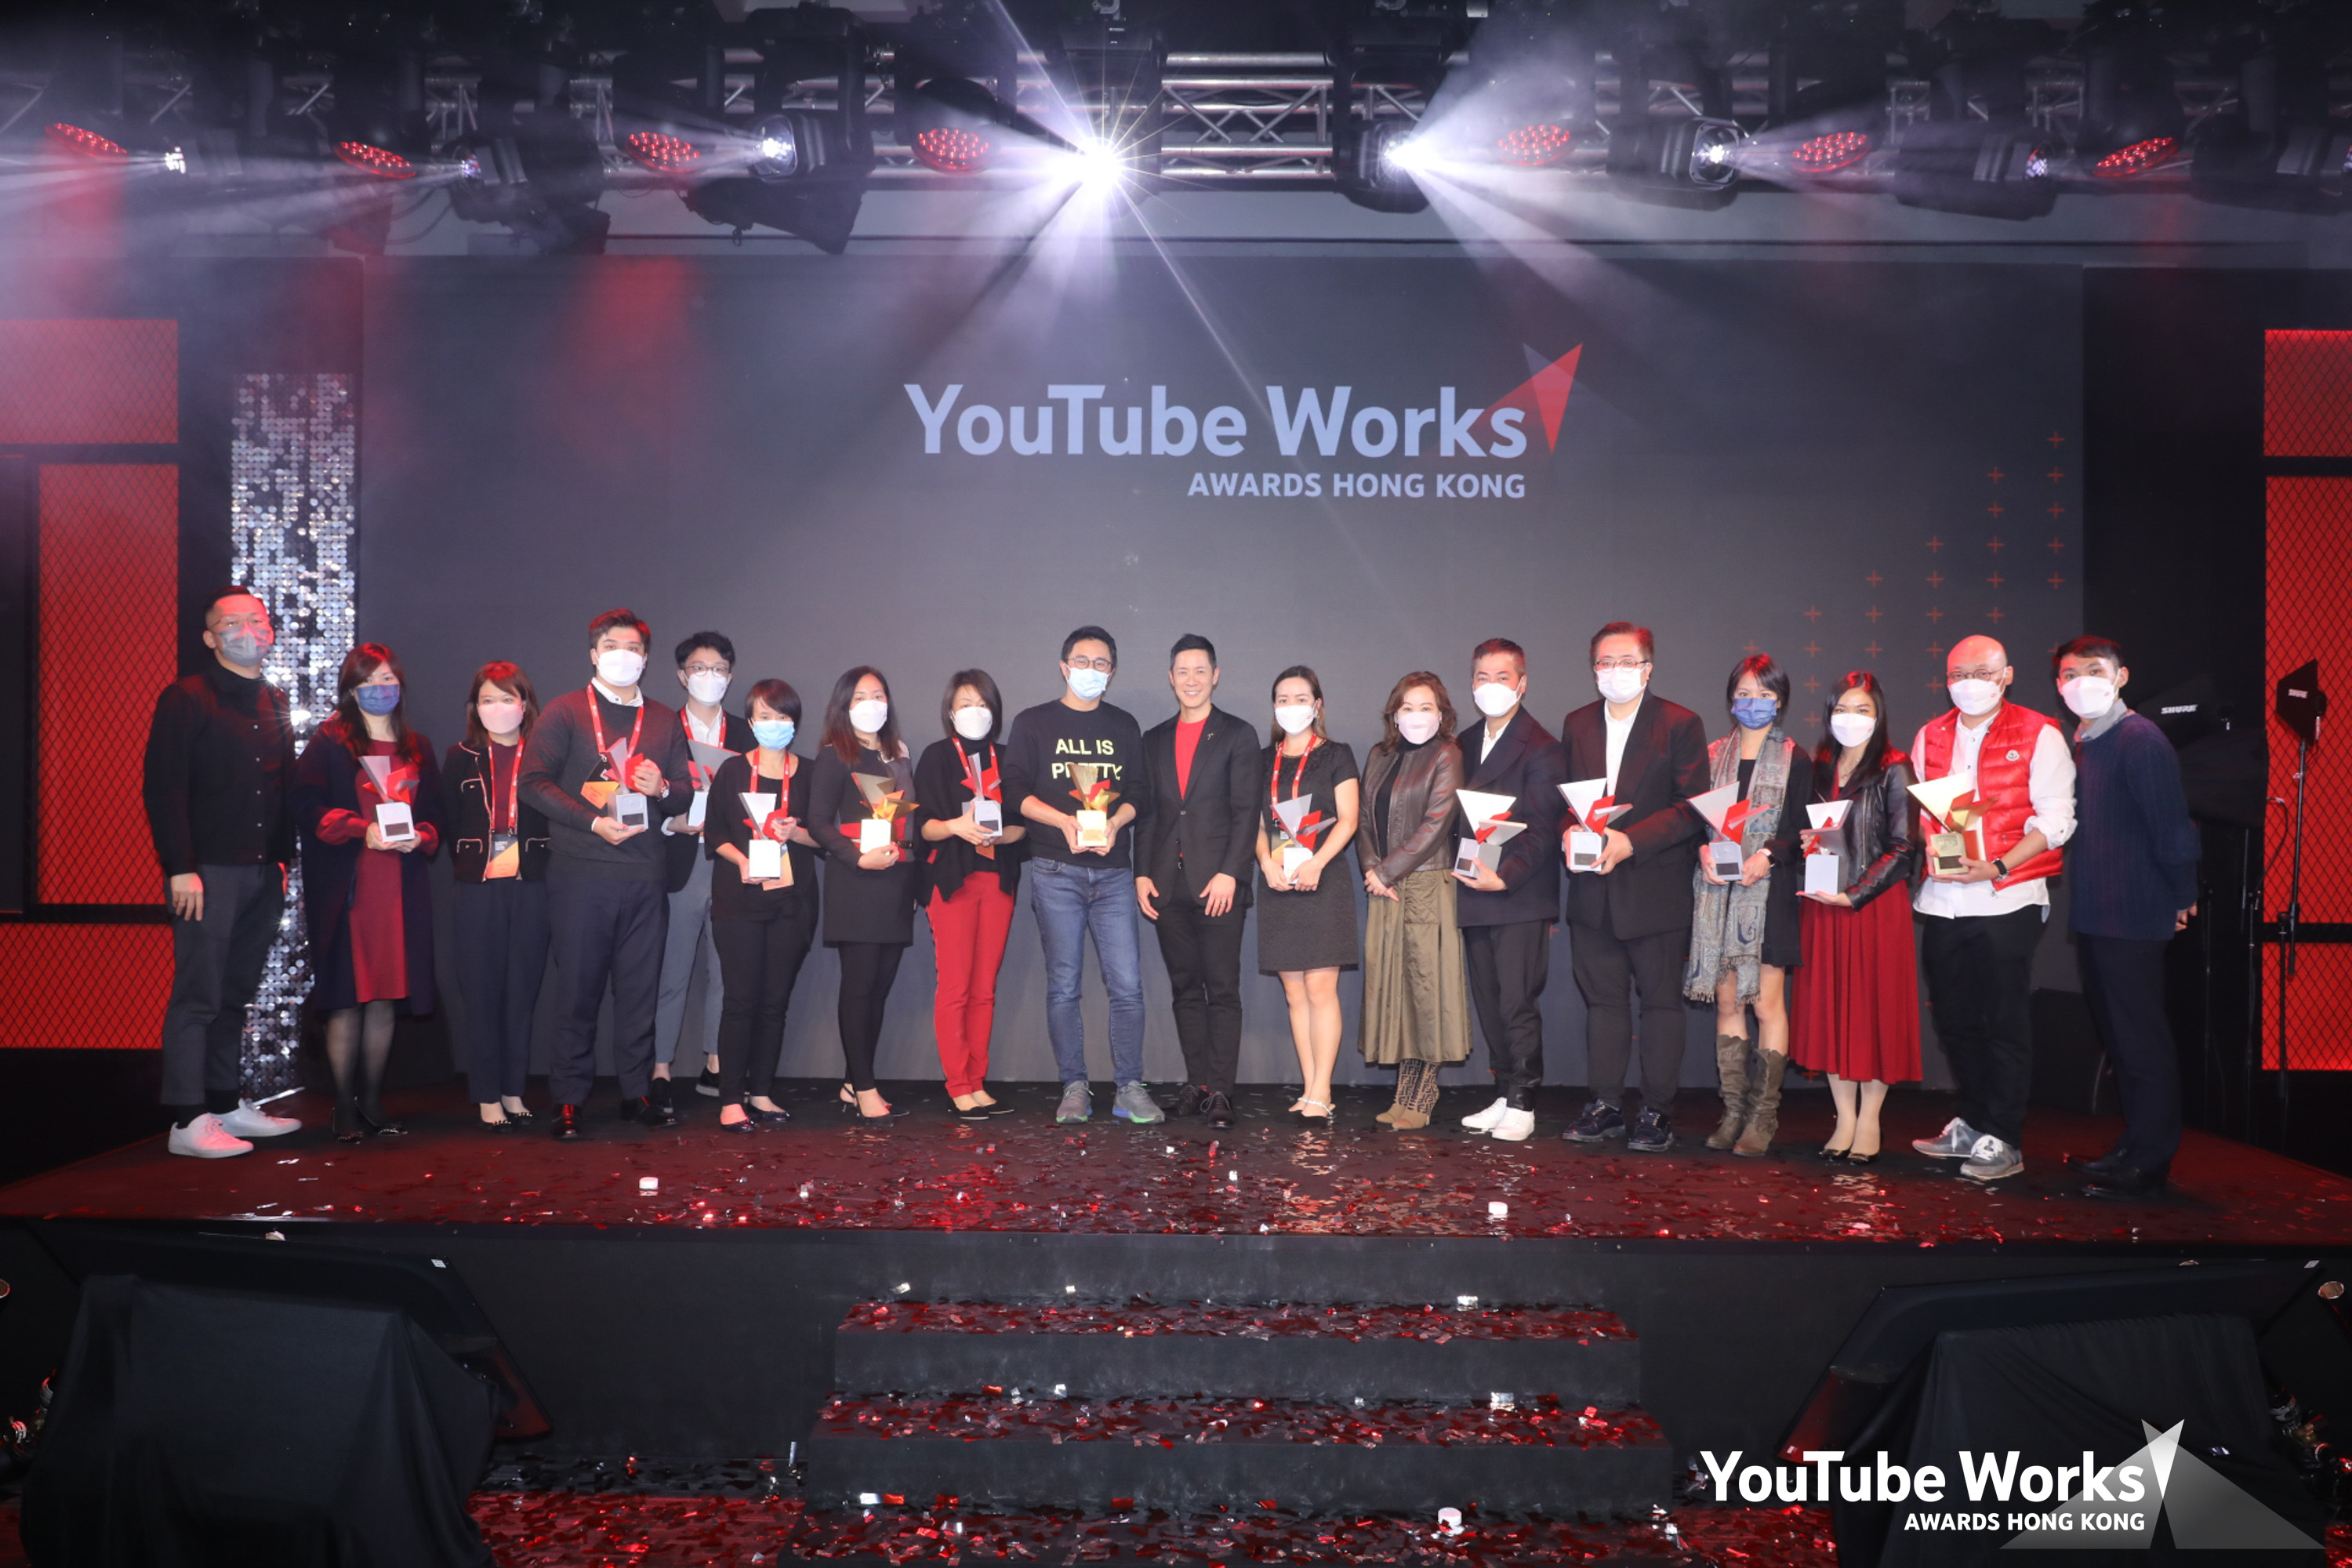 Michael Yue, General Manager, Sales & Operations, Google Hong Kong (middle), and winners of YouTube Works Awards 2022 (from left to right): HSBC, Café de Coral, and Otsuka Pharmaceutical (H.K.) Ltd.